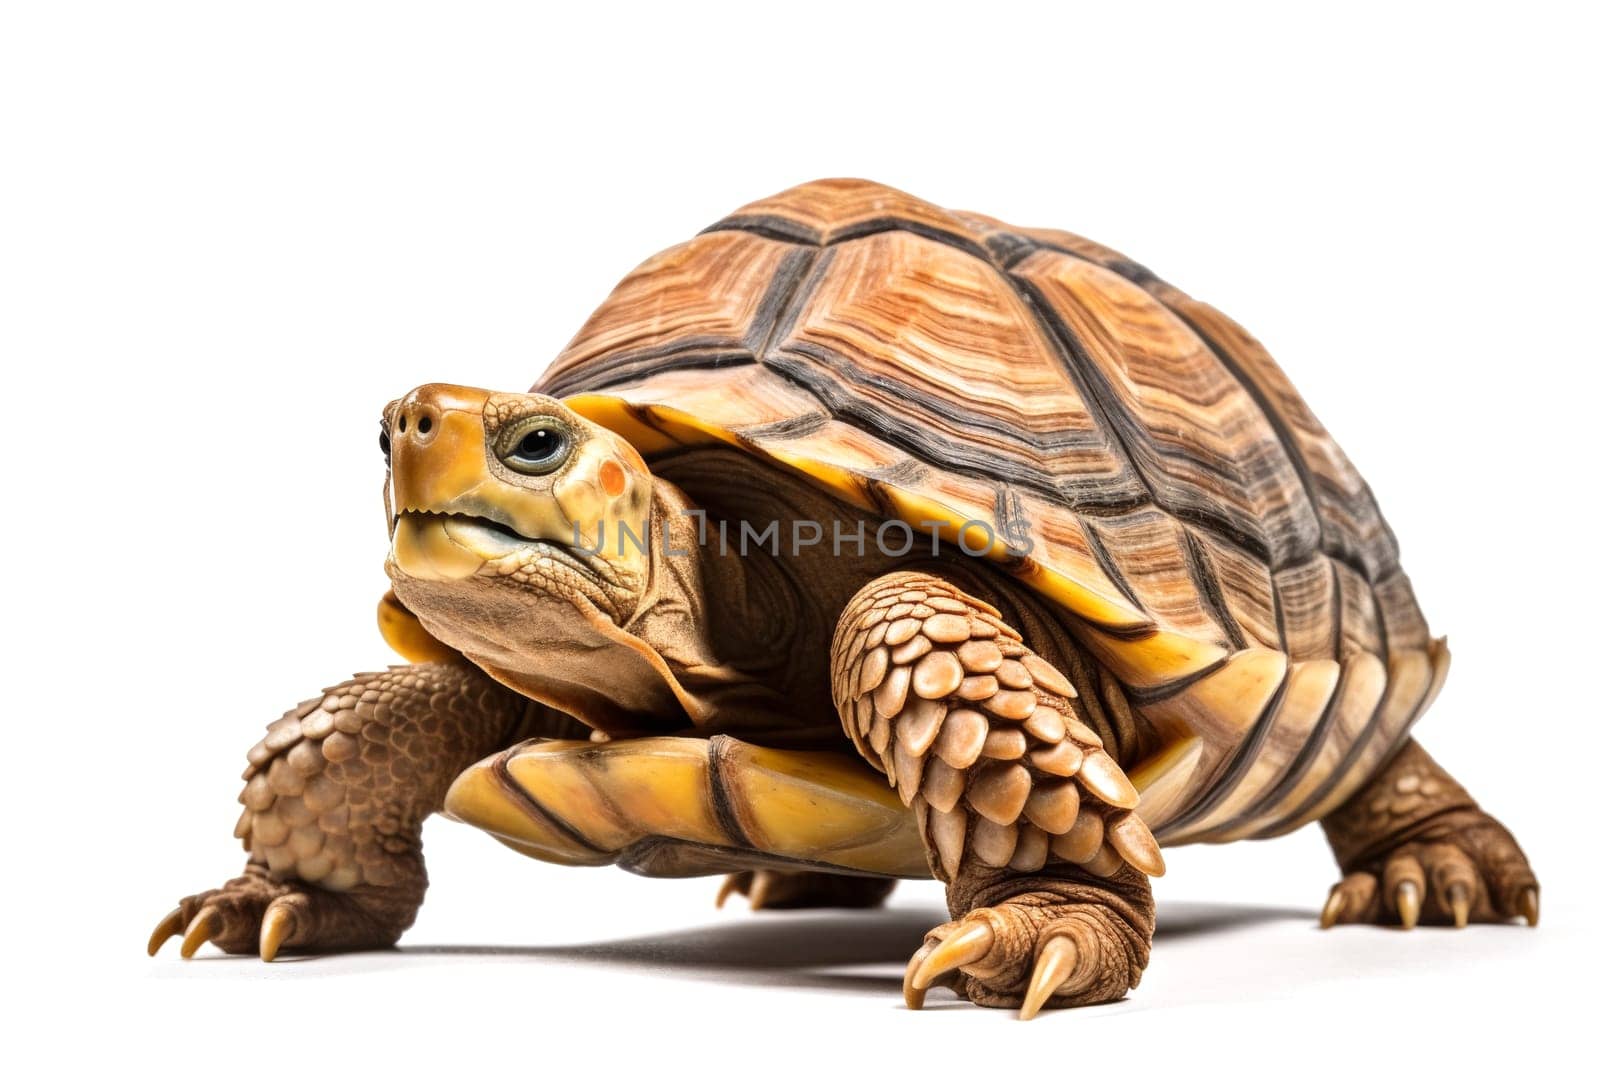 Sulcata tortoise on a white background. Close-up studio portrait. Wildlife and exotic pets concept. Design for educational material, poster, book illustration